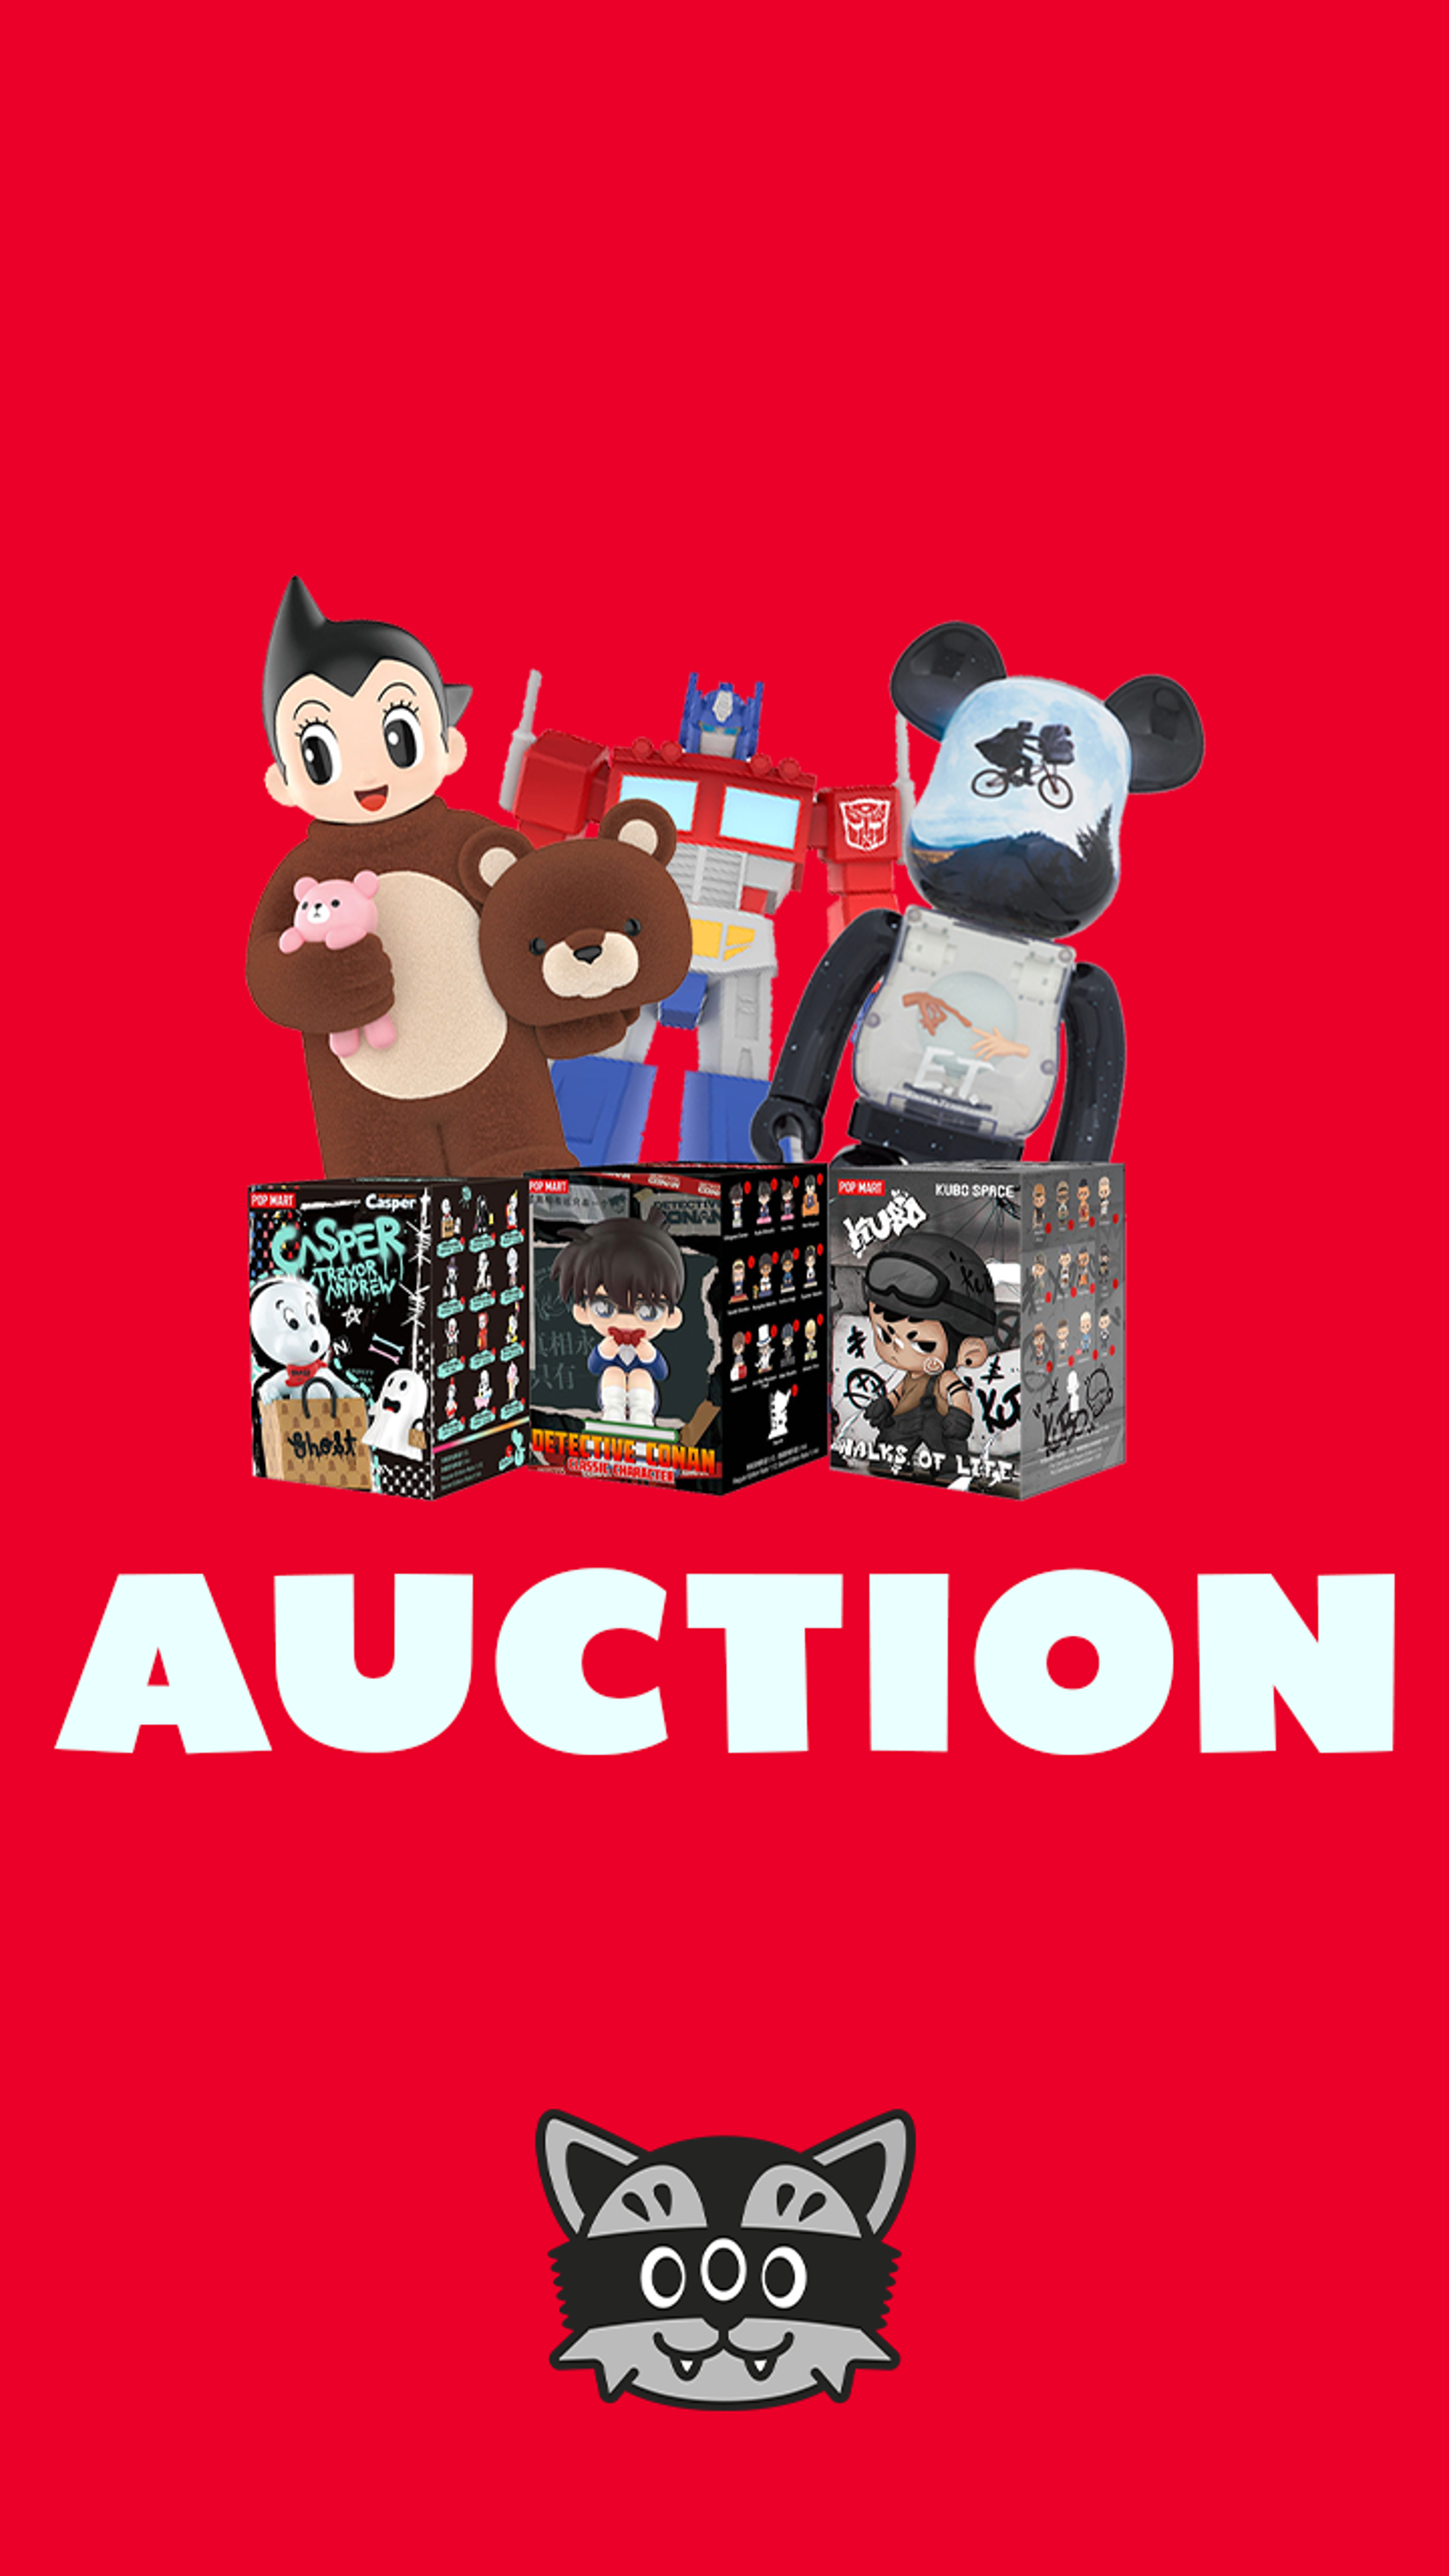 Preview image for the show titled "Mindzai Auction - February 29" at February 29, 2024